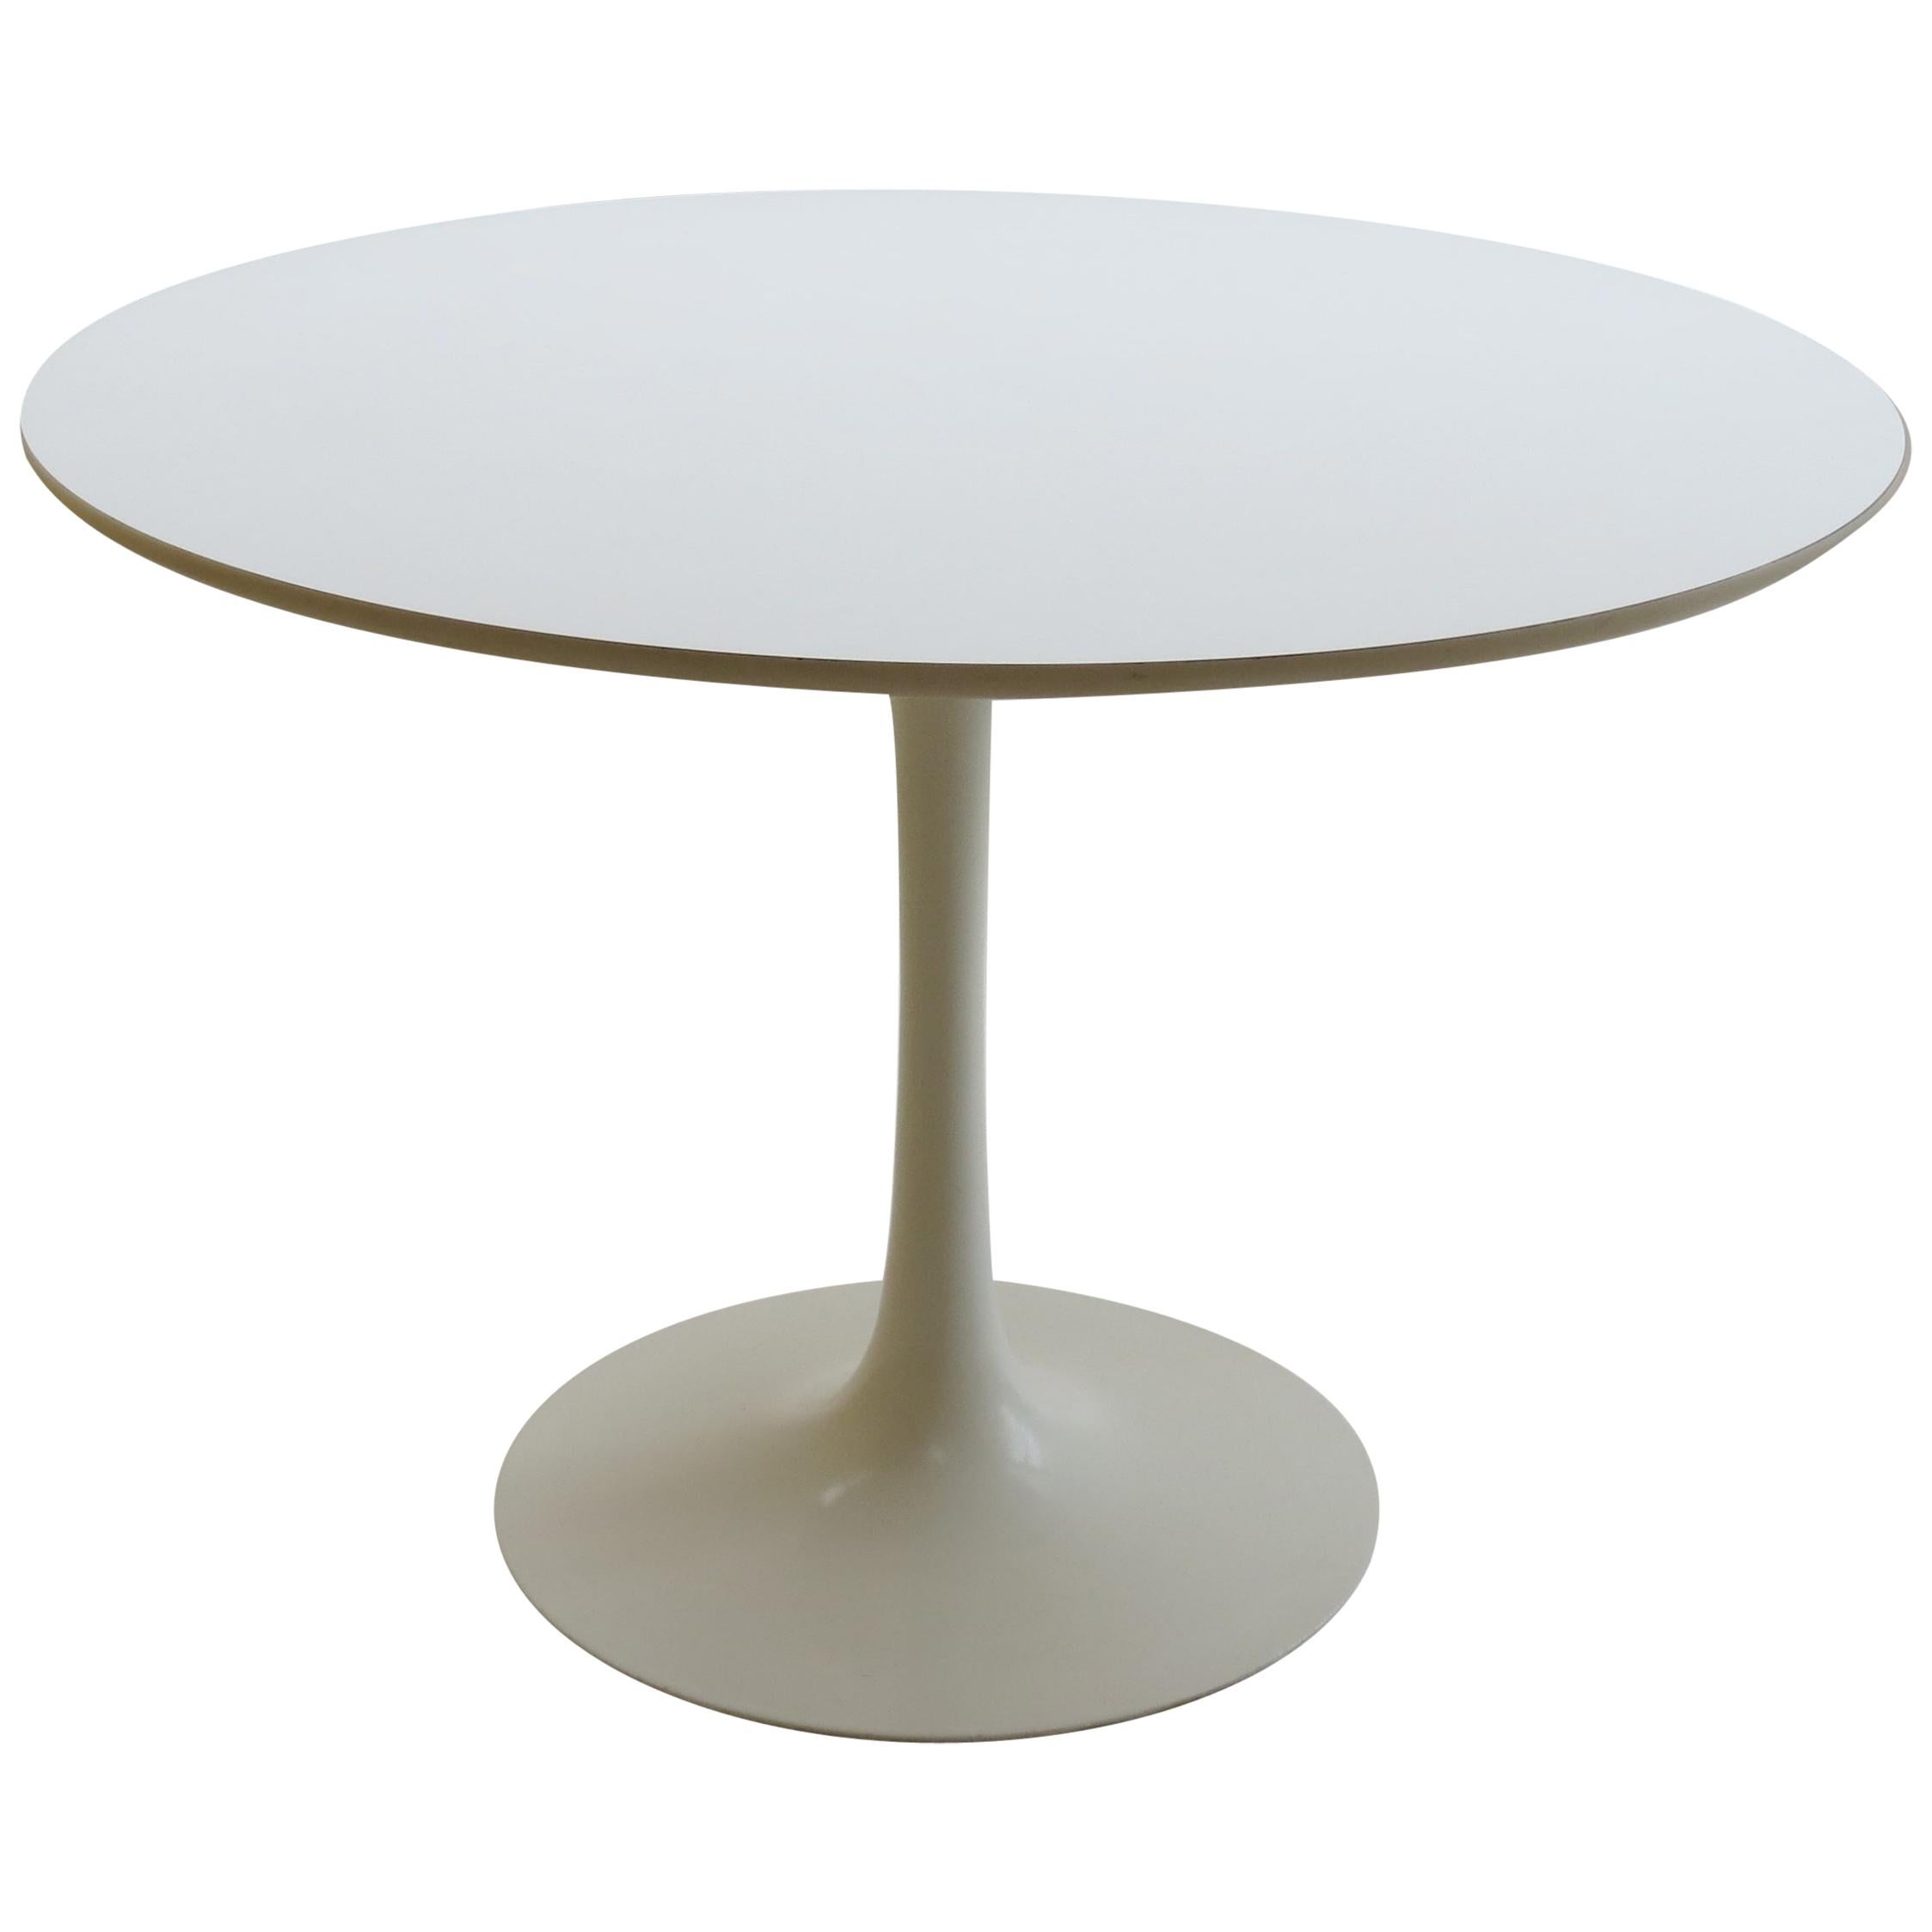 Midcentury 1960s Tulip Dining Table by Maurice Burke for Arkana, UK